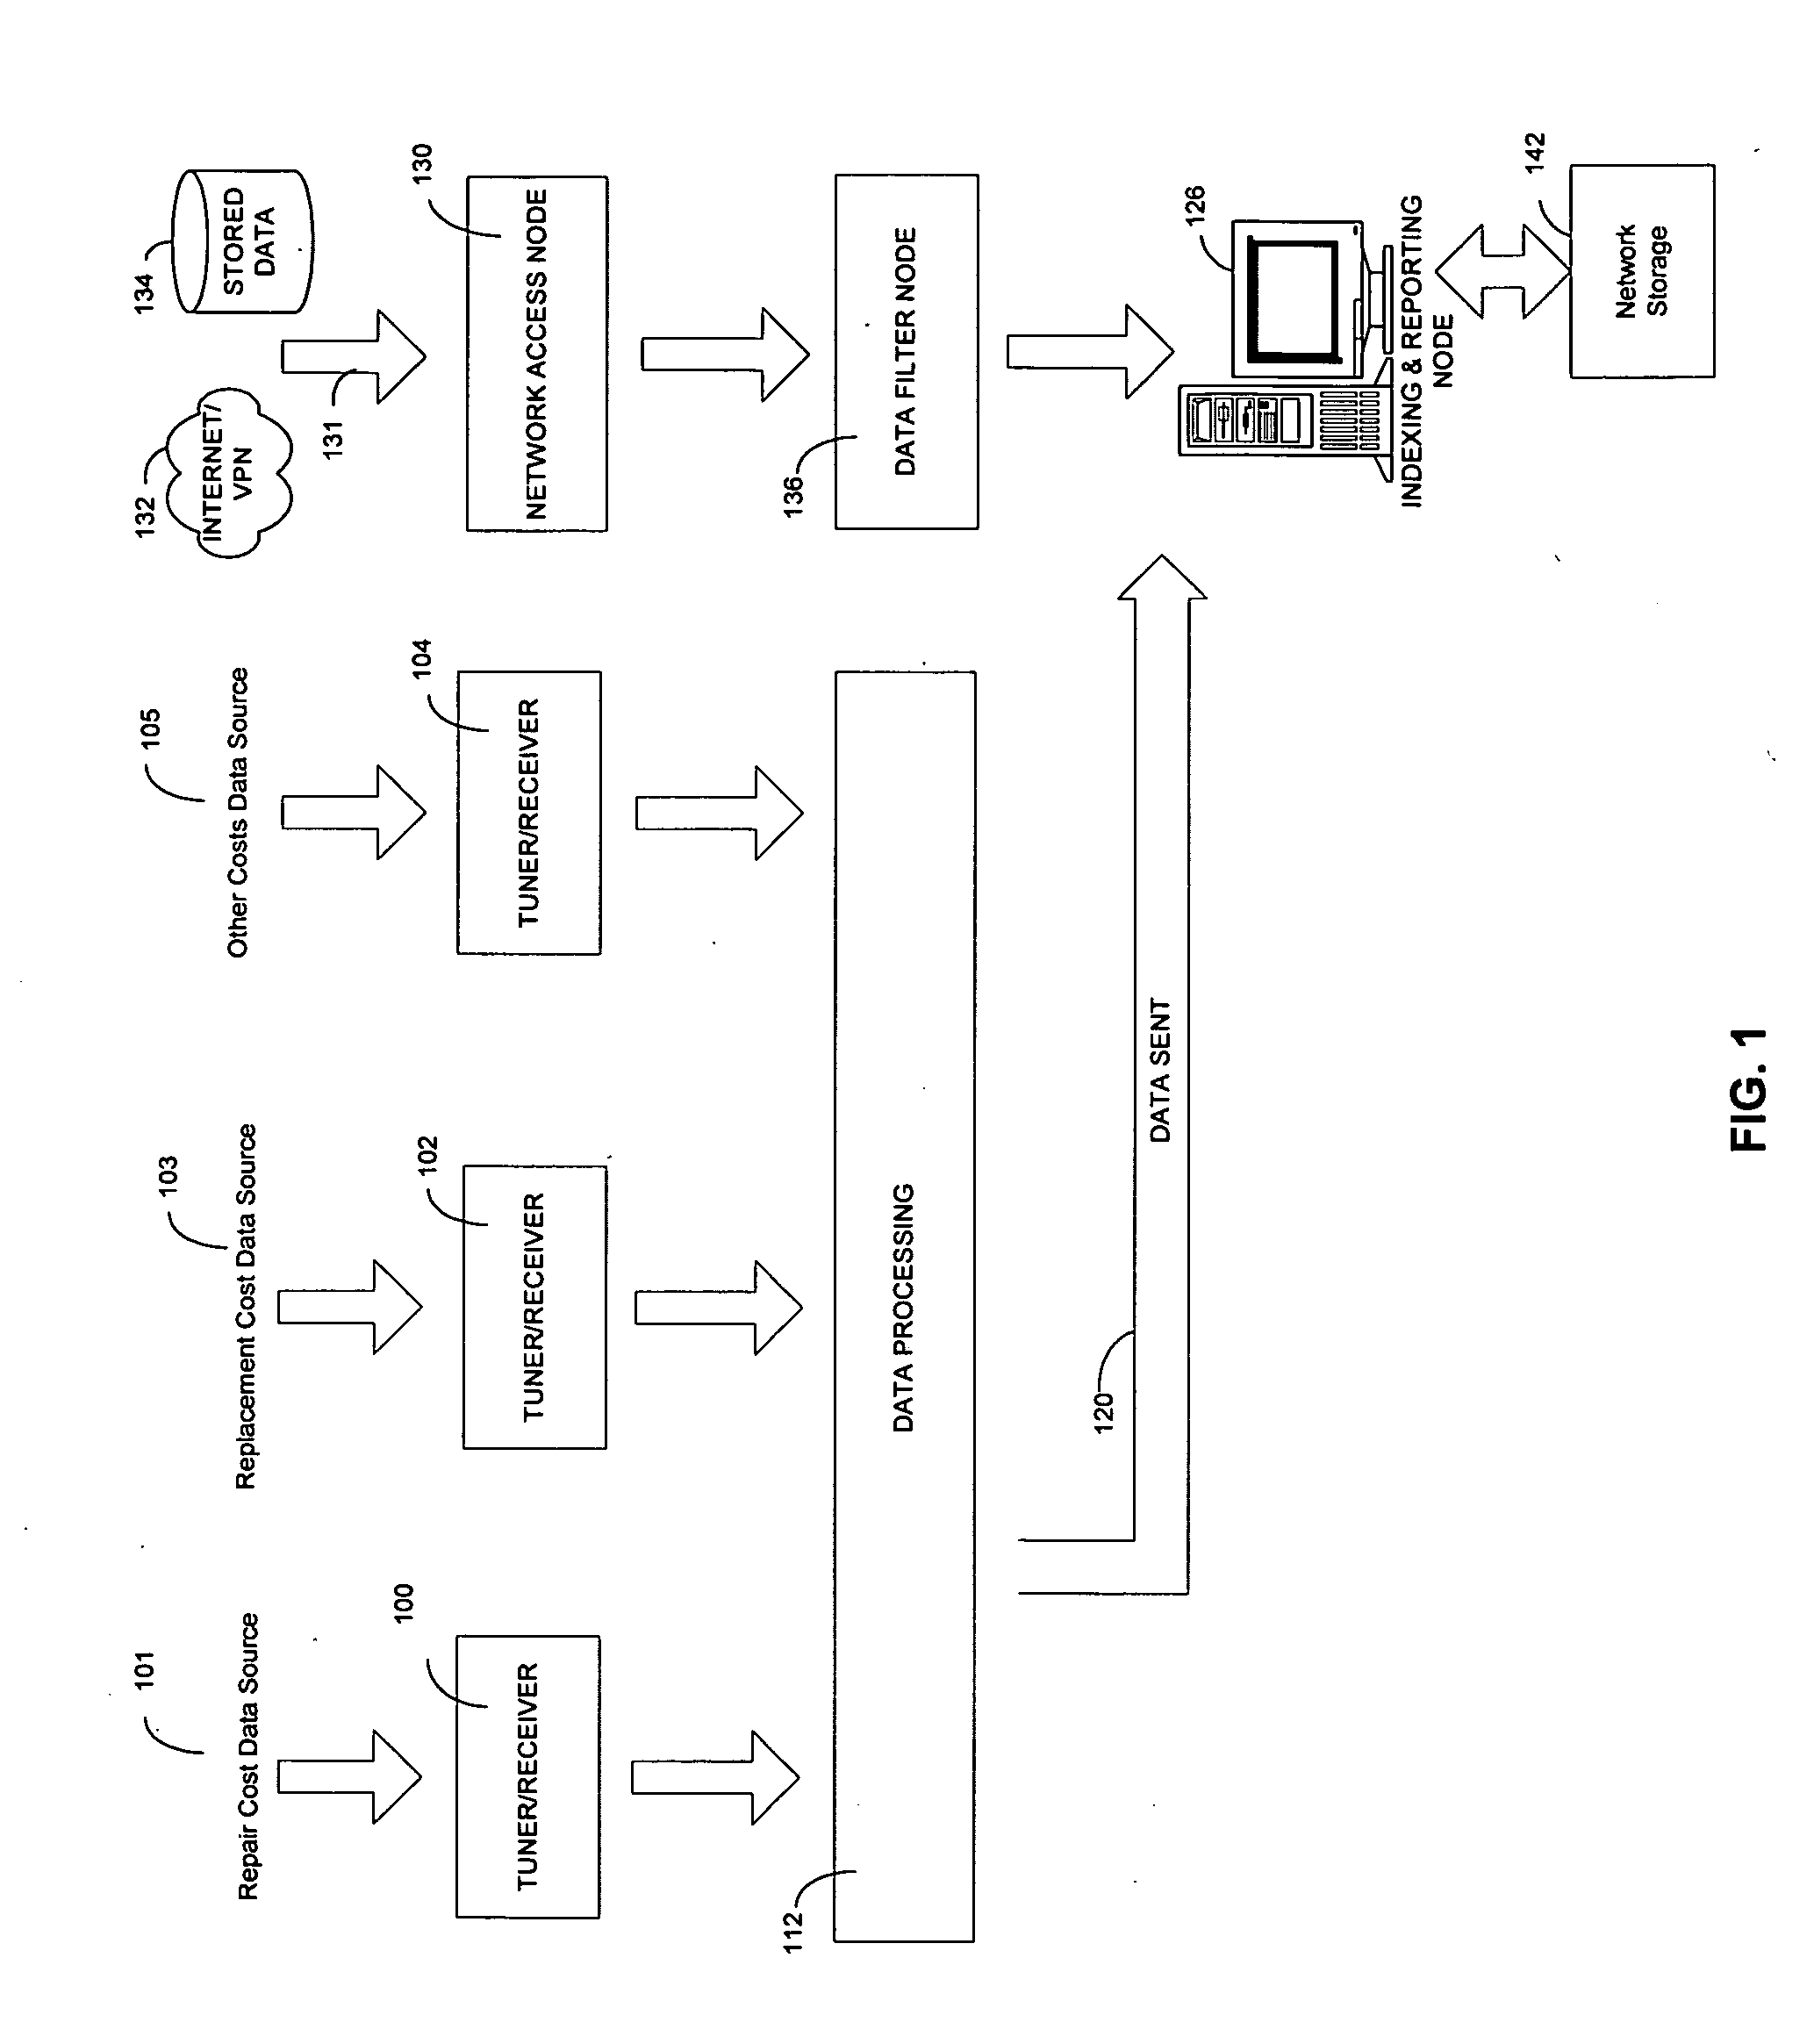 System and method for salvage calculation, fraud prevention and insurance adjustment